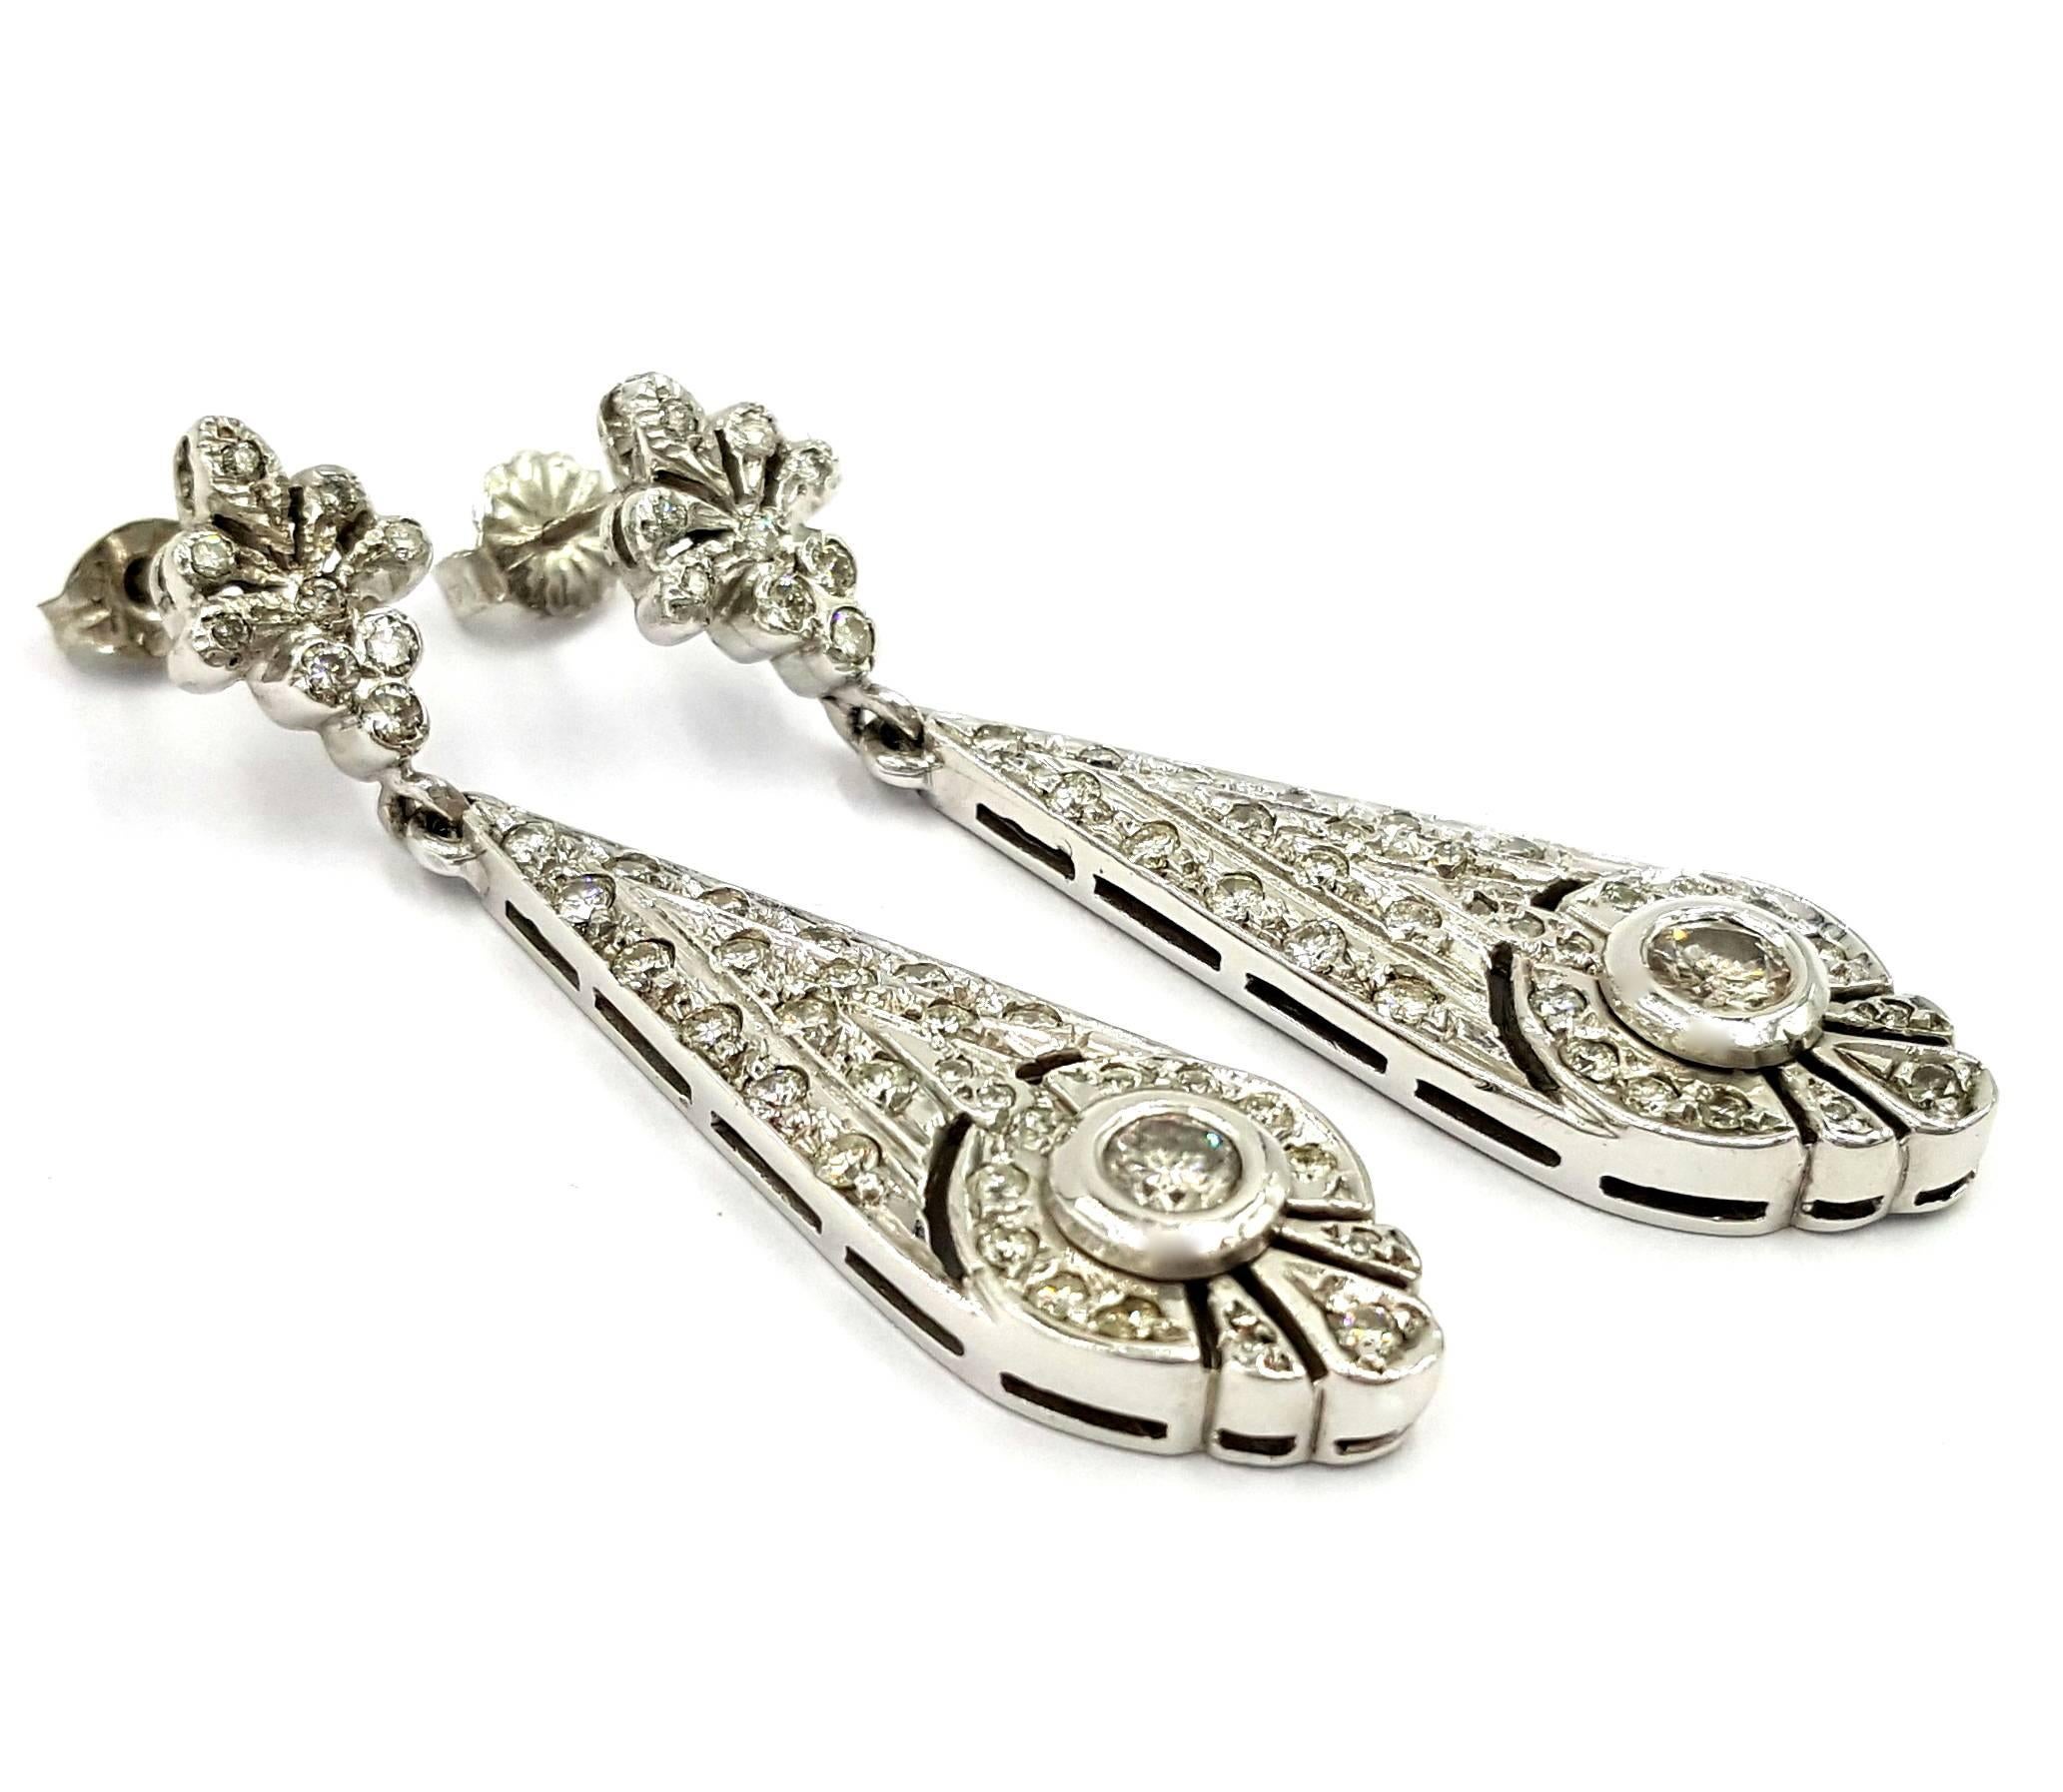 Stunning Circa 1950s 18kt Gold Featuring 3 Carats of Diamonds in Dangle Earrings In Excellent Condition For Sale In Scottsdale, AZ